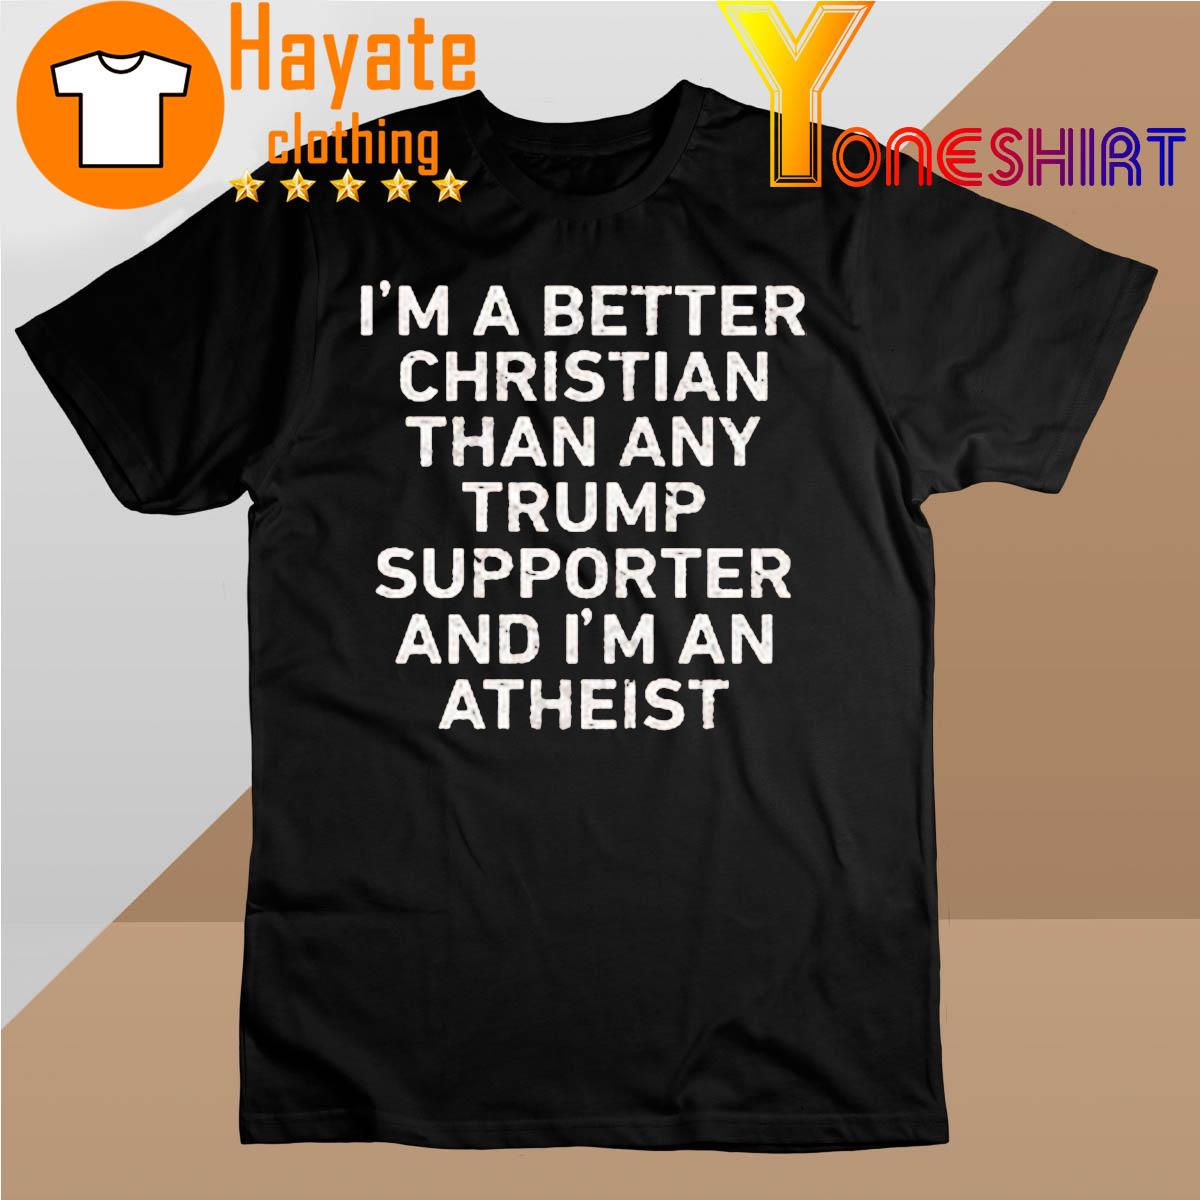 I’m A Better Christian Than Any Trump Supporter And I’m An Atheist Shirt